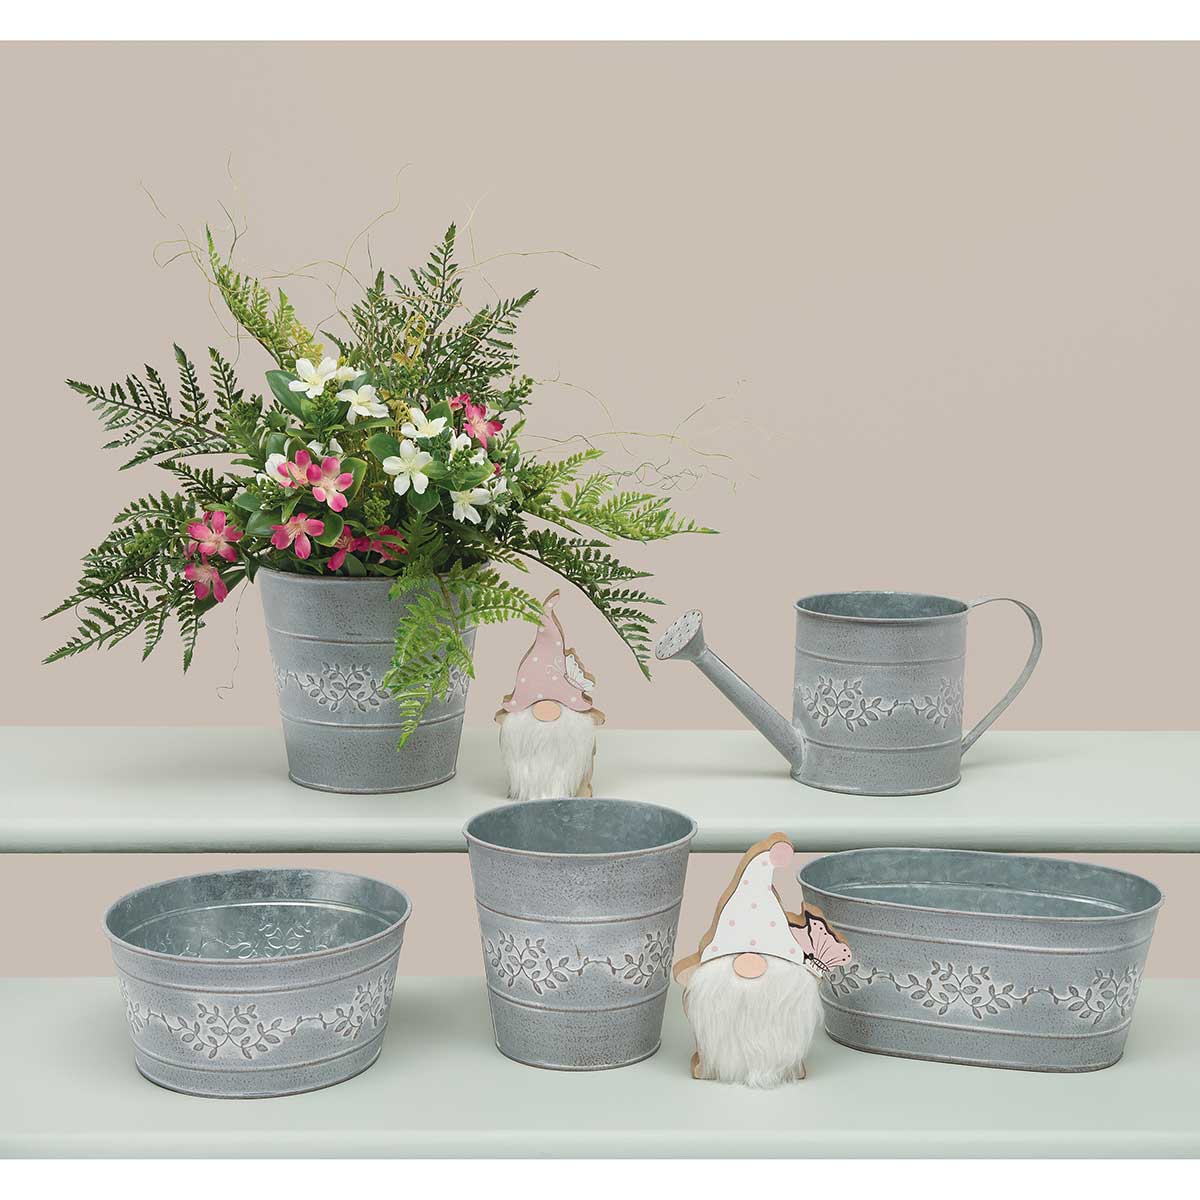 BUCKET PRIVET GREY LARGE 7.25IN X 6.5IN METAL - Click Image to Close